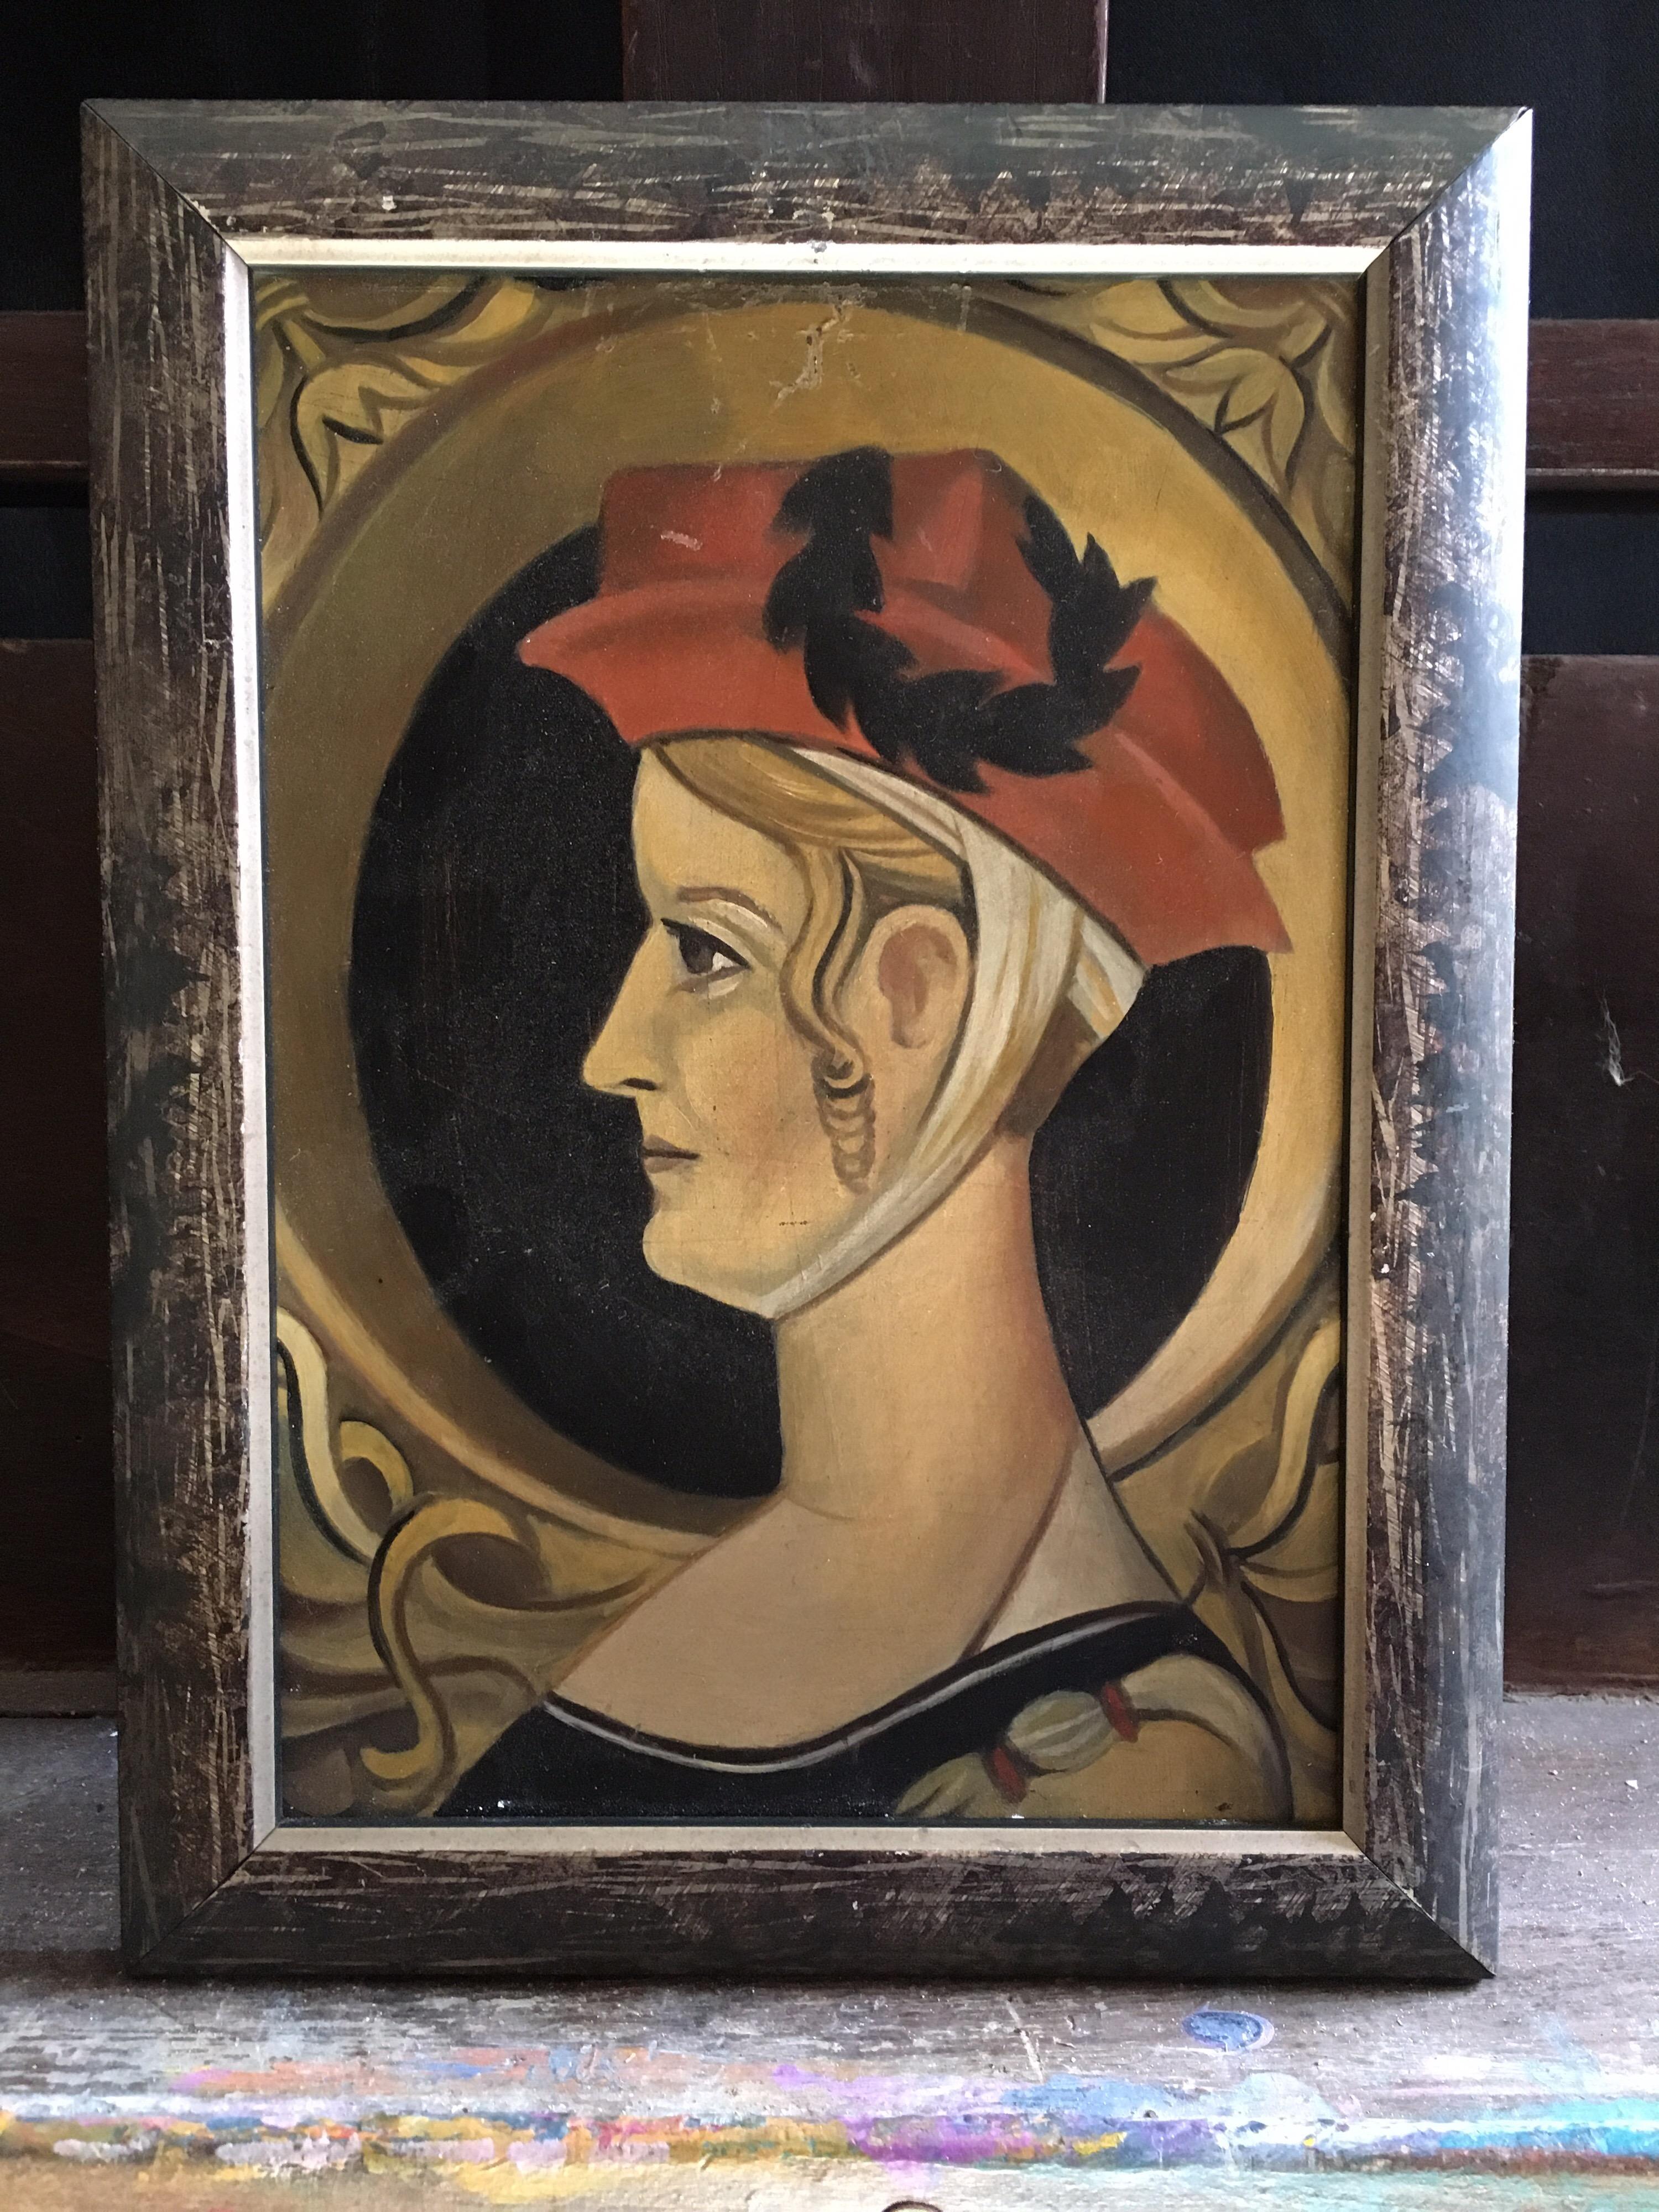 Lady with the Red Hat, Impressionist Portrait, Original Oil Painting
By European Schooled artist, Mid 20th Century
Oil painting on metal, framed
Framed size: 10.5 x 8 inches

Fabulous portrait of a blonde lady, with her golden hair tucked into a